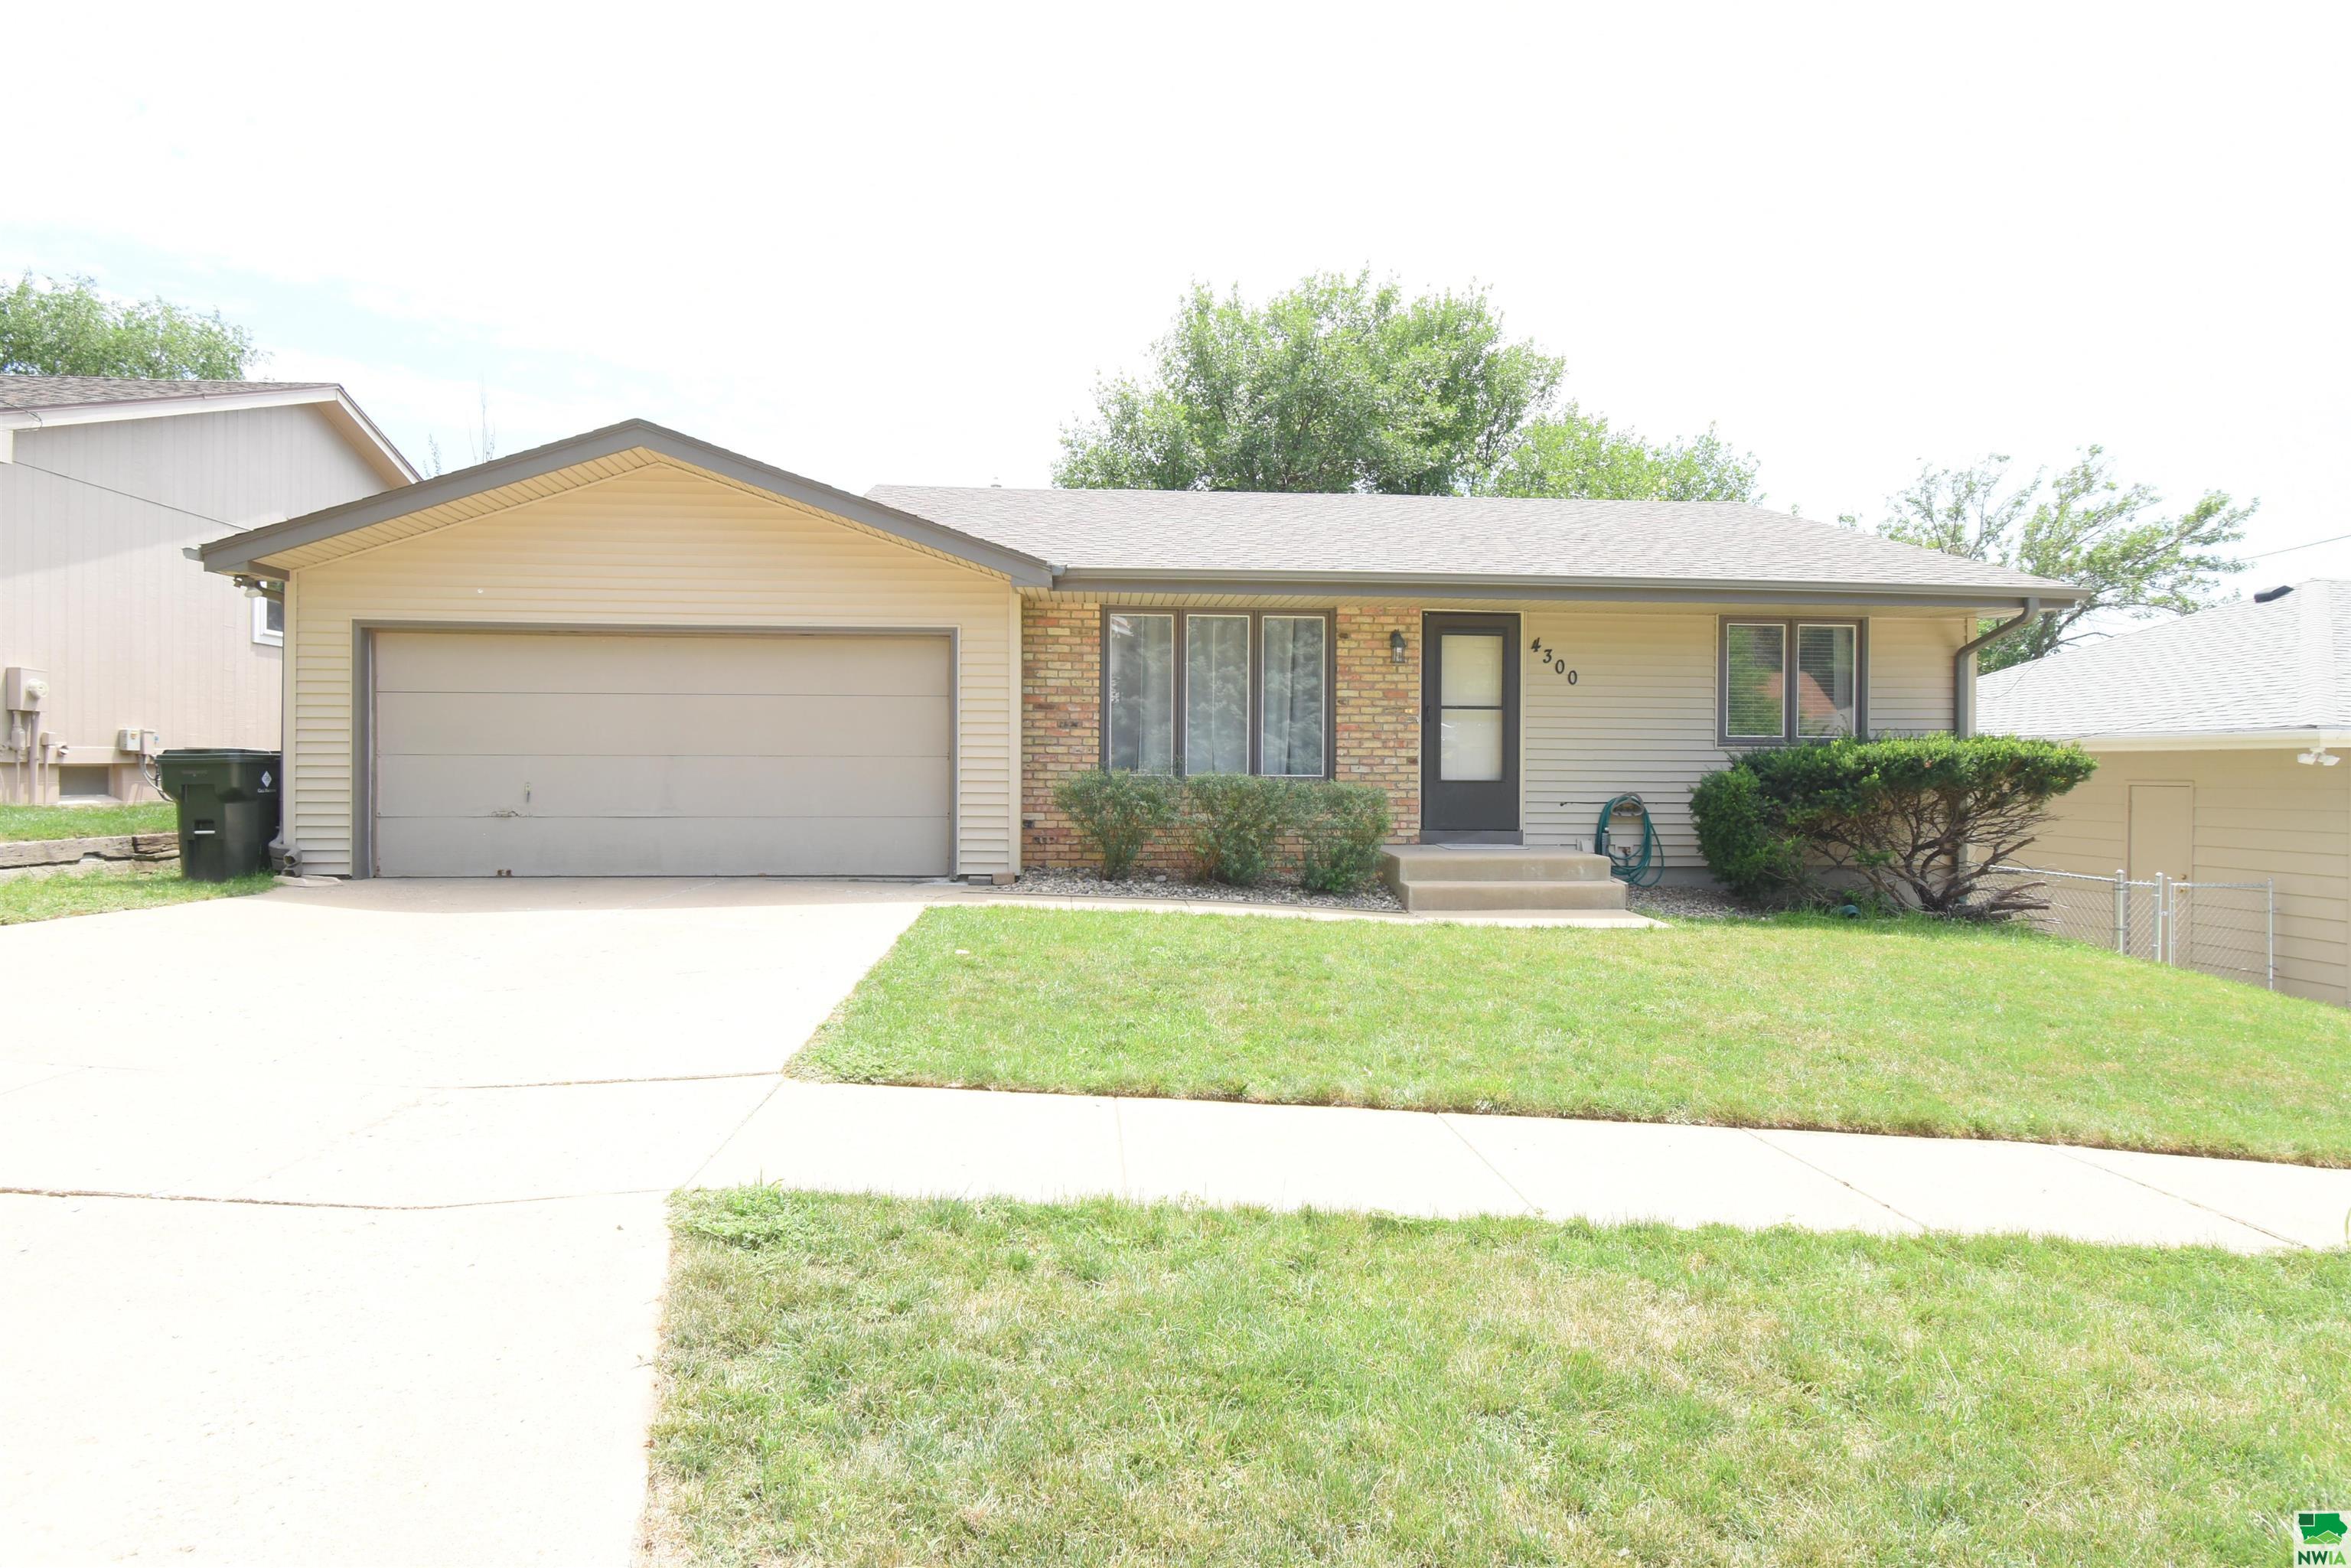 4300 Seger Ave, Sioux City, 51106 